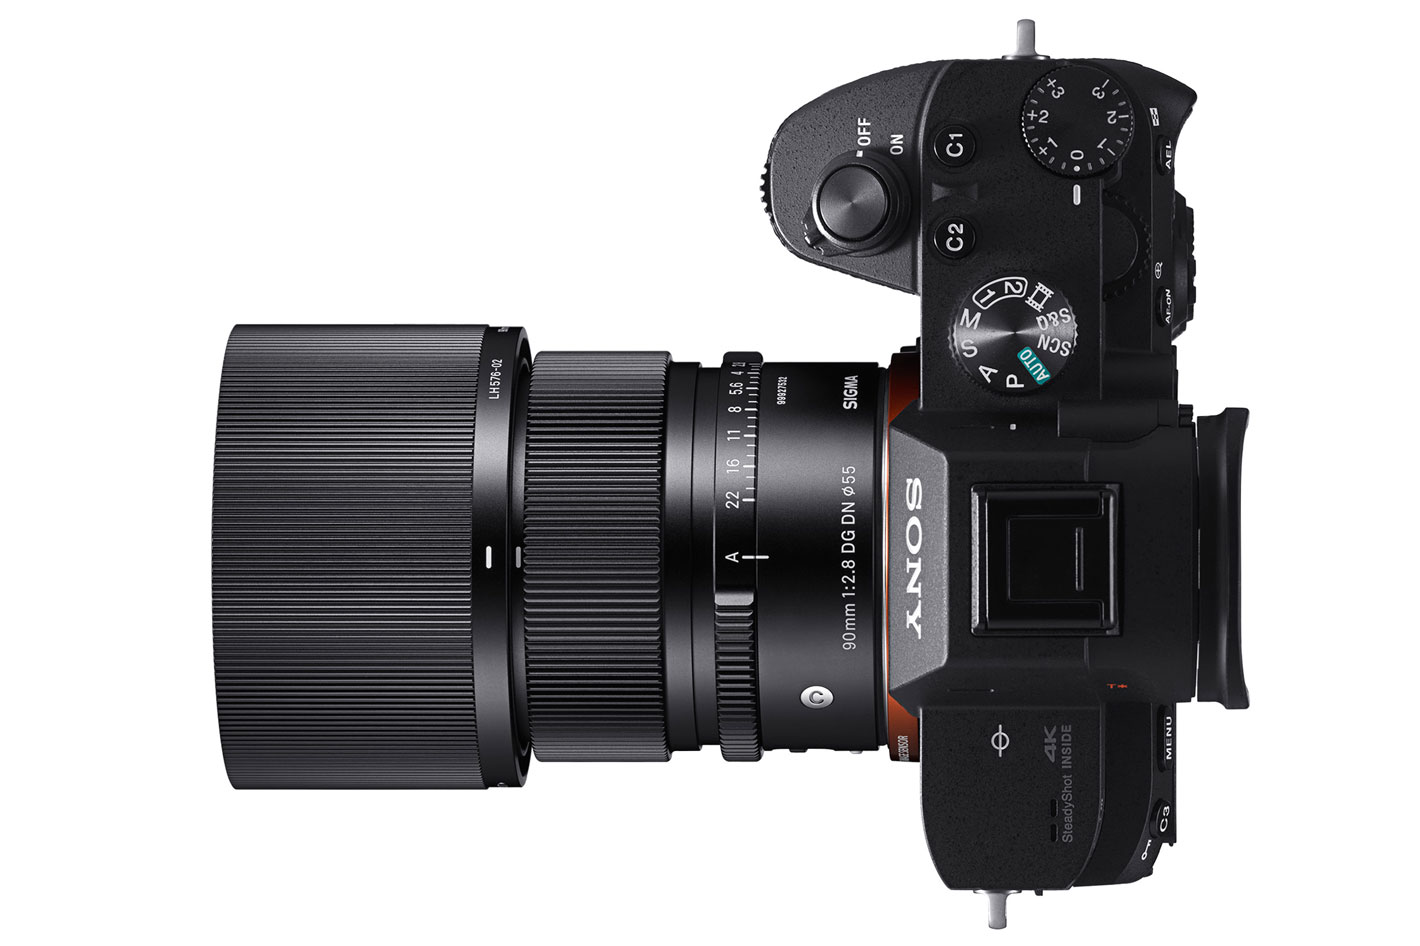 SIGMA introduces new lenses and announces contest